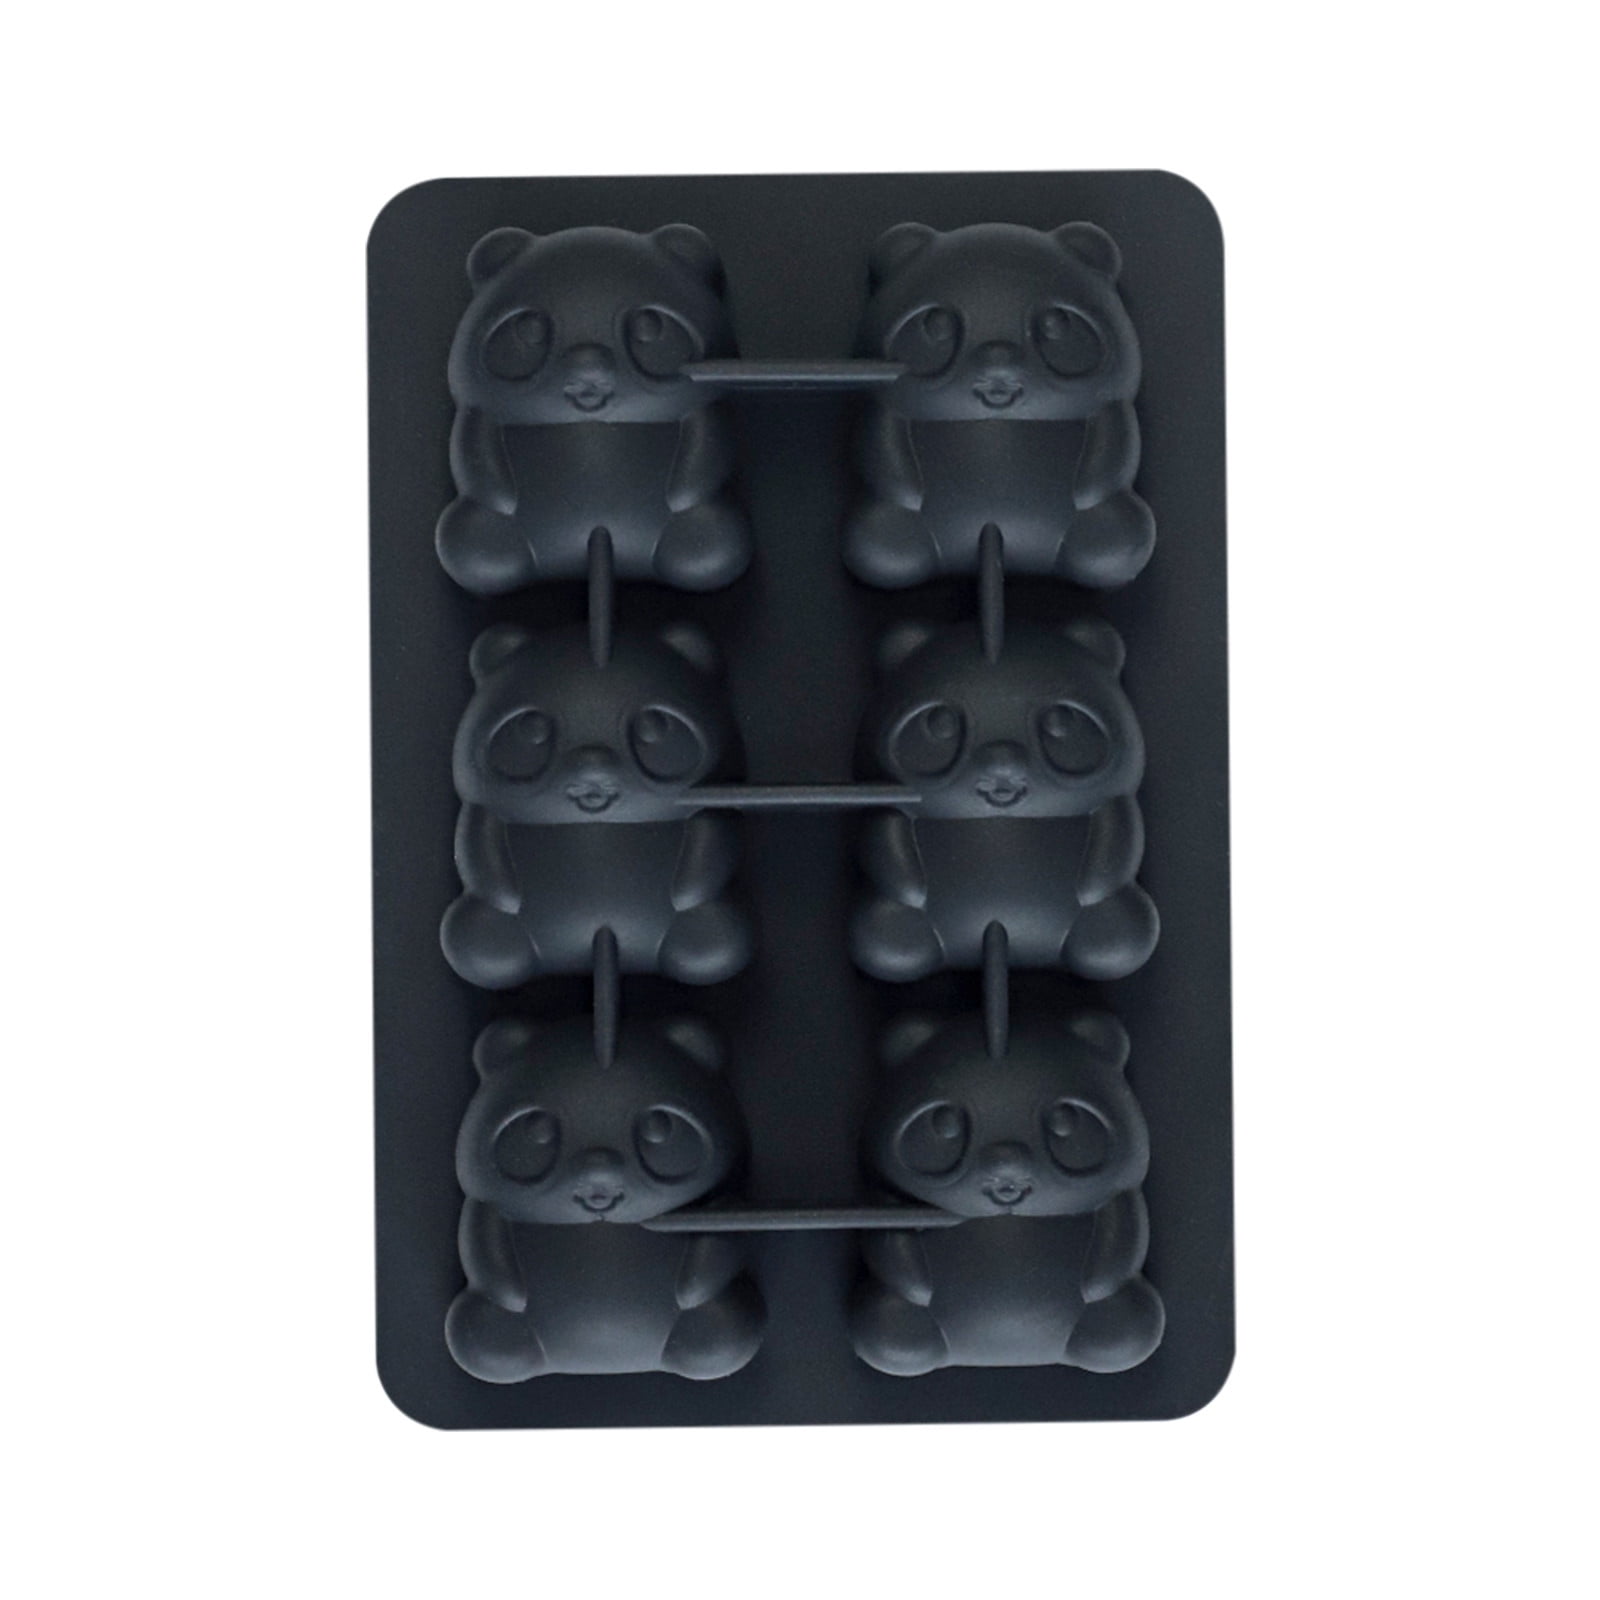 Martellato Ma2014 Chocolate Mold with 6 Connected-Squares Cavities, Each 70mm x 70mm x 11mm High, Size: One Size